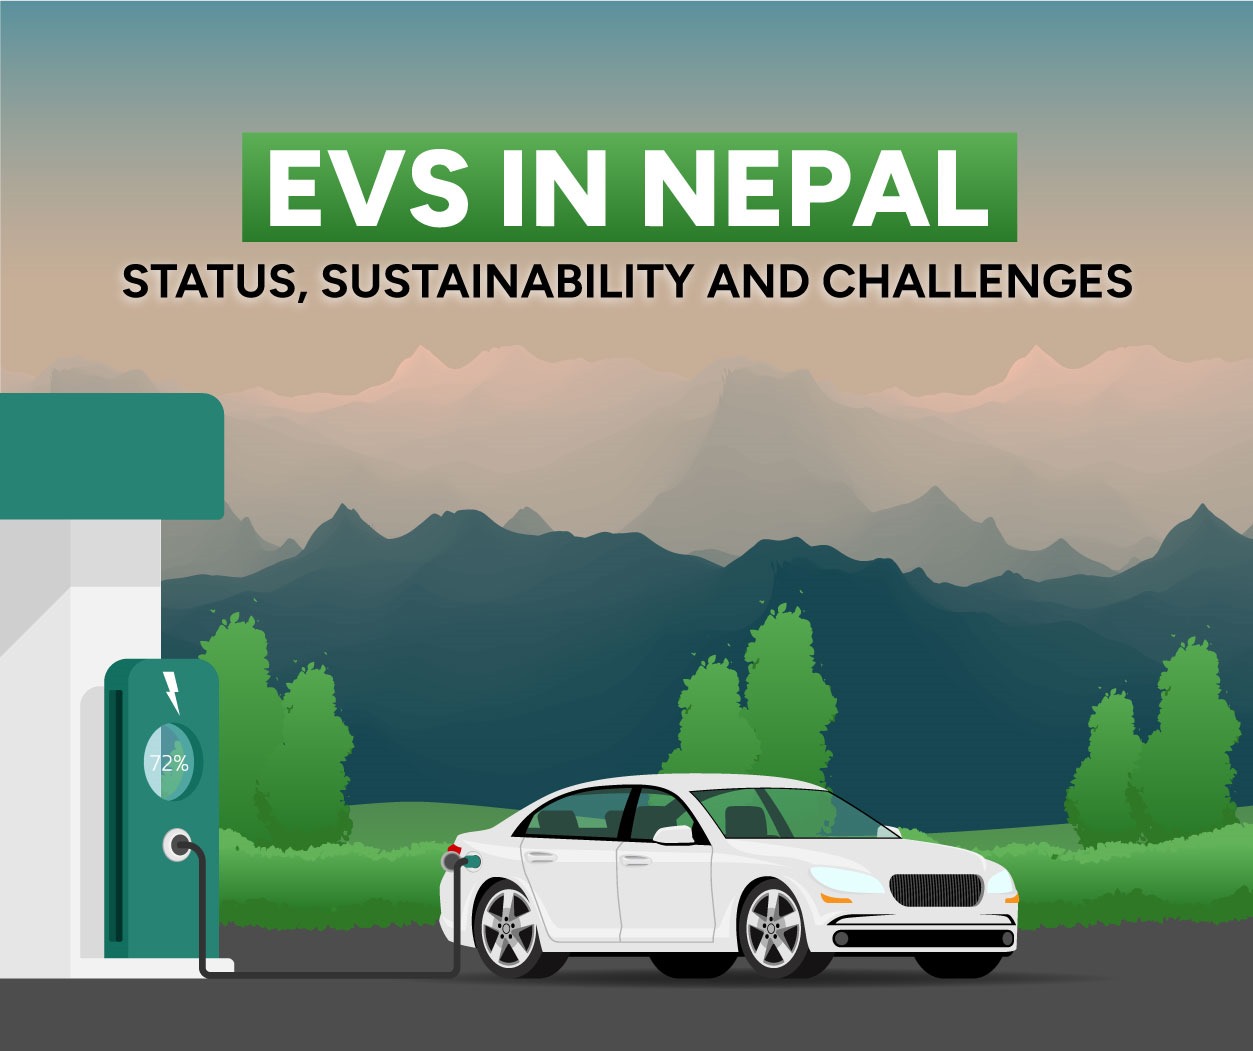 EVs in Nepal: Status, Sustainability and Challenges